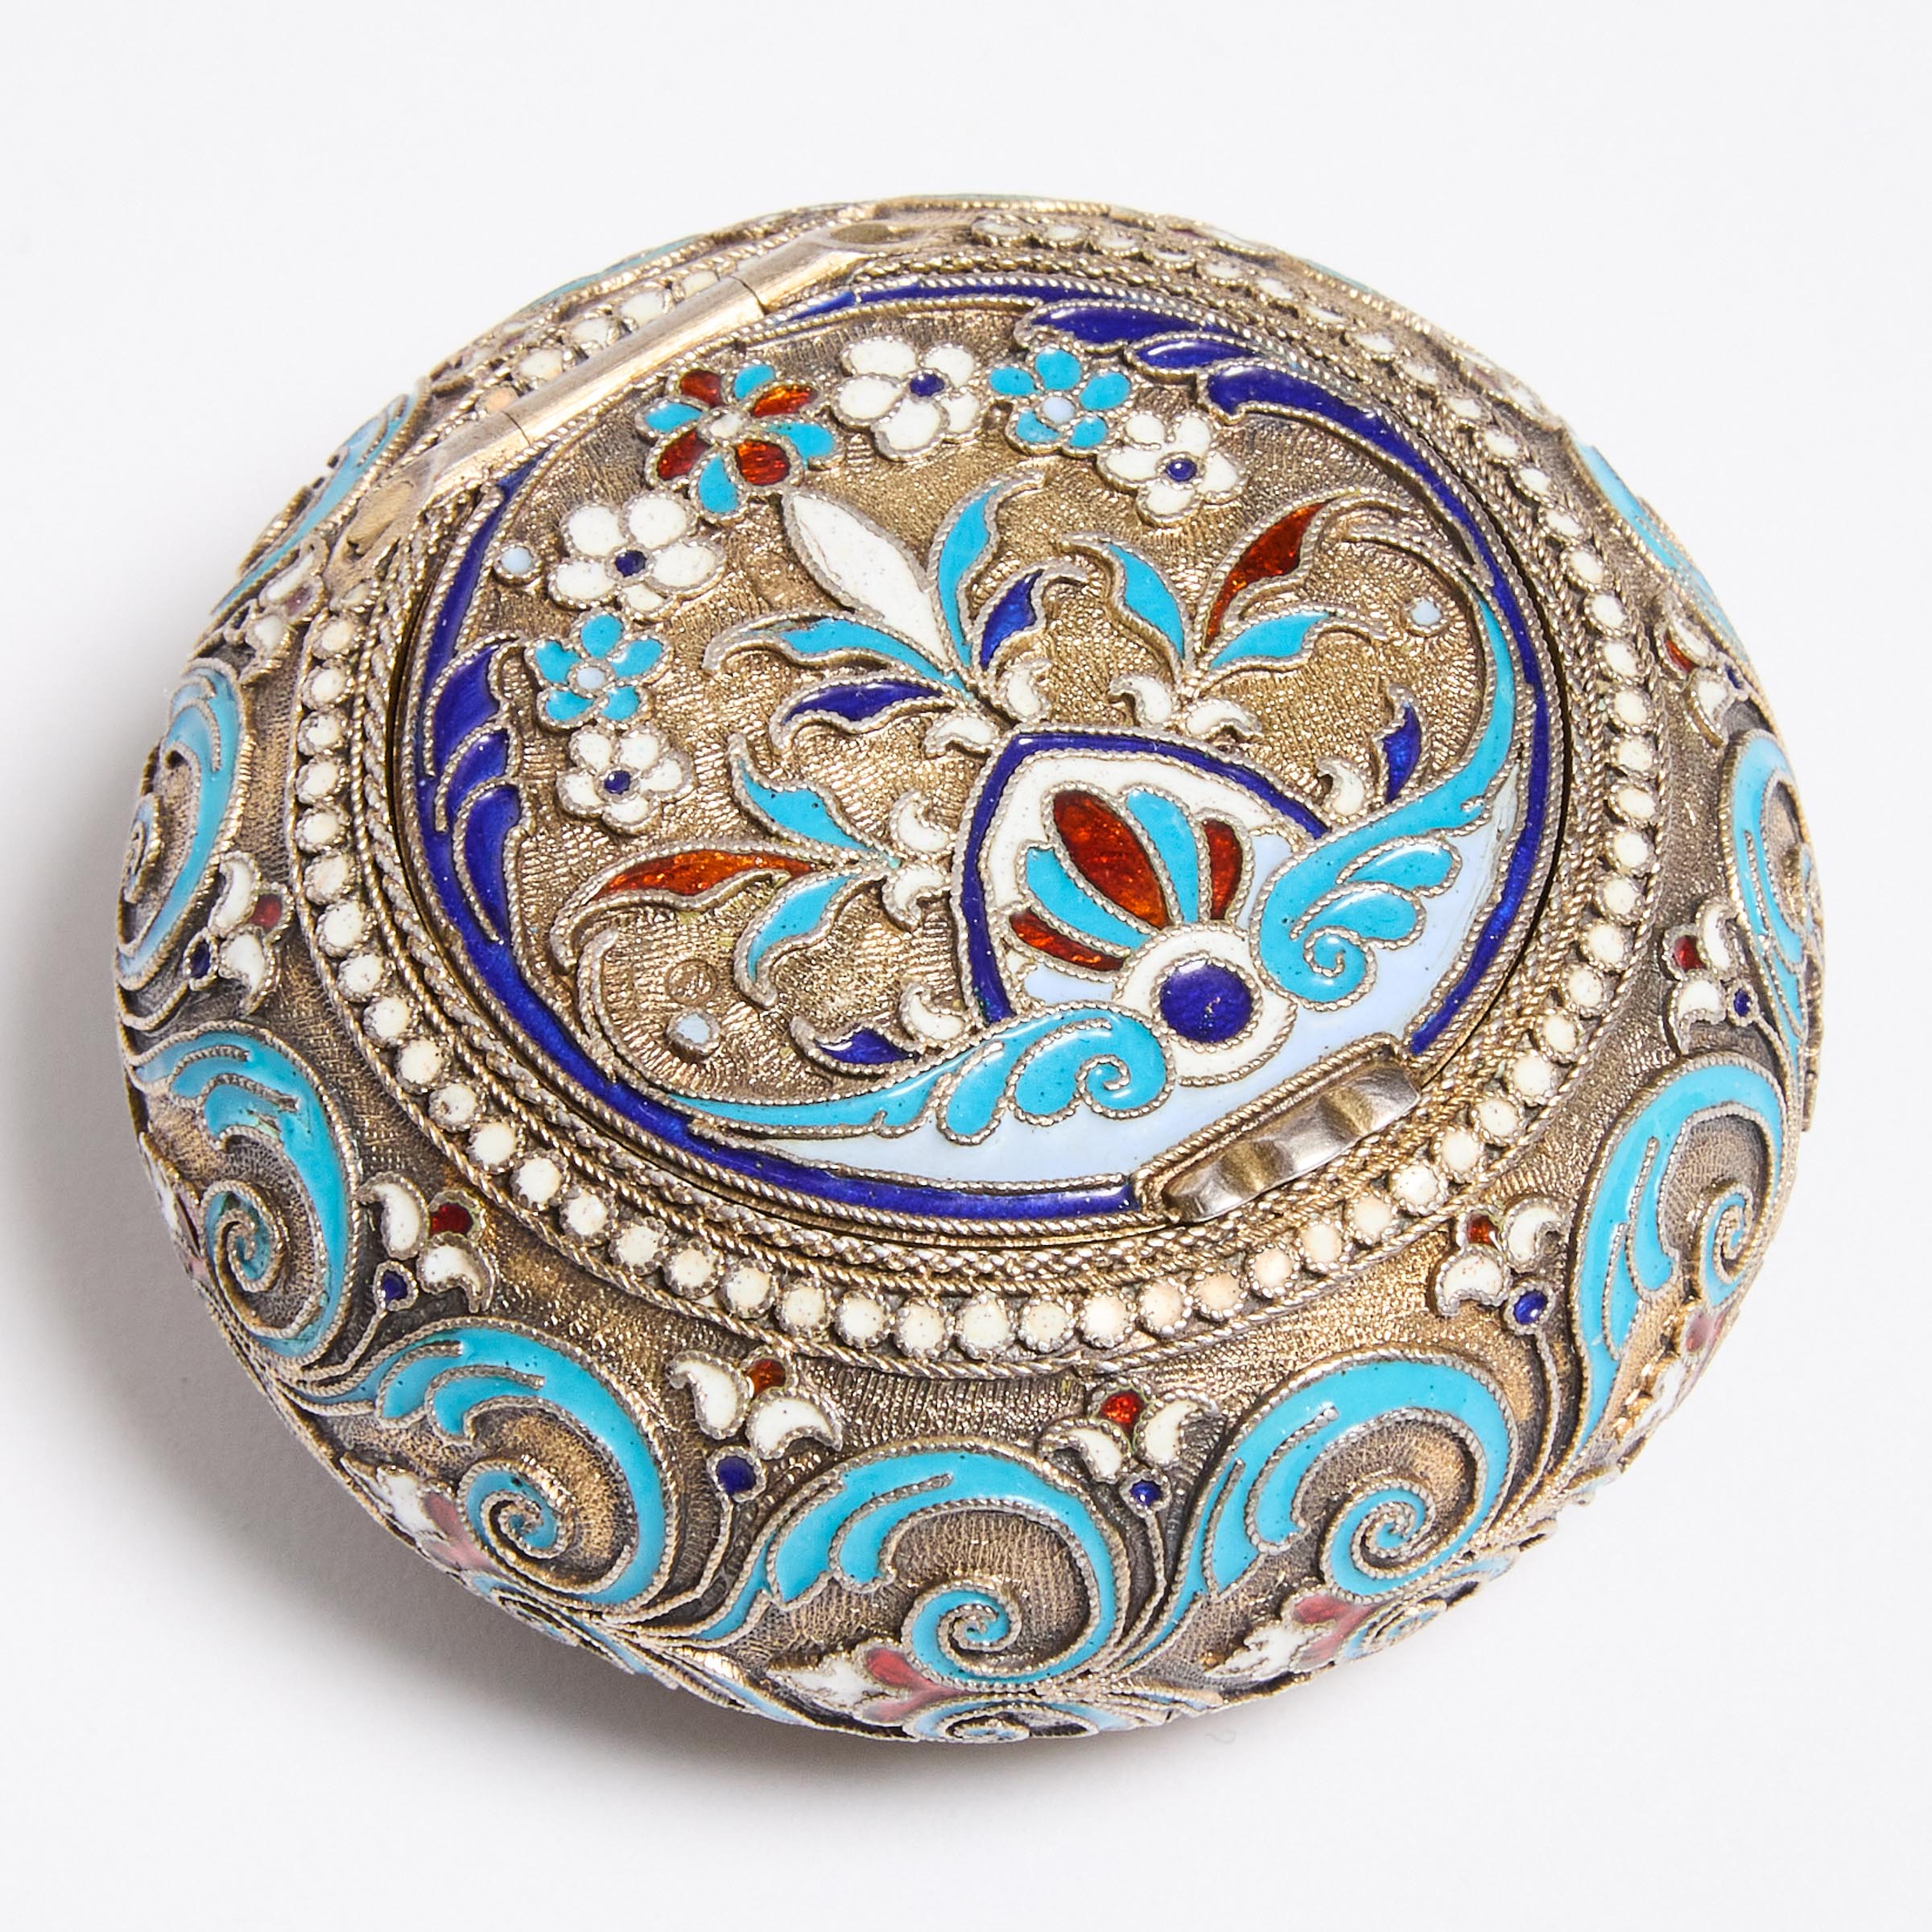 Russian Silver-Gilt and Cloisonné